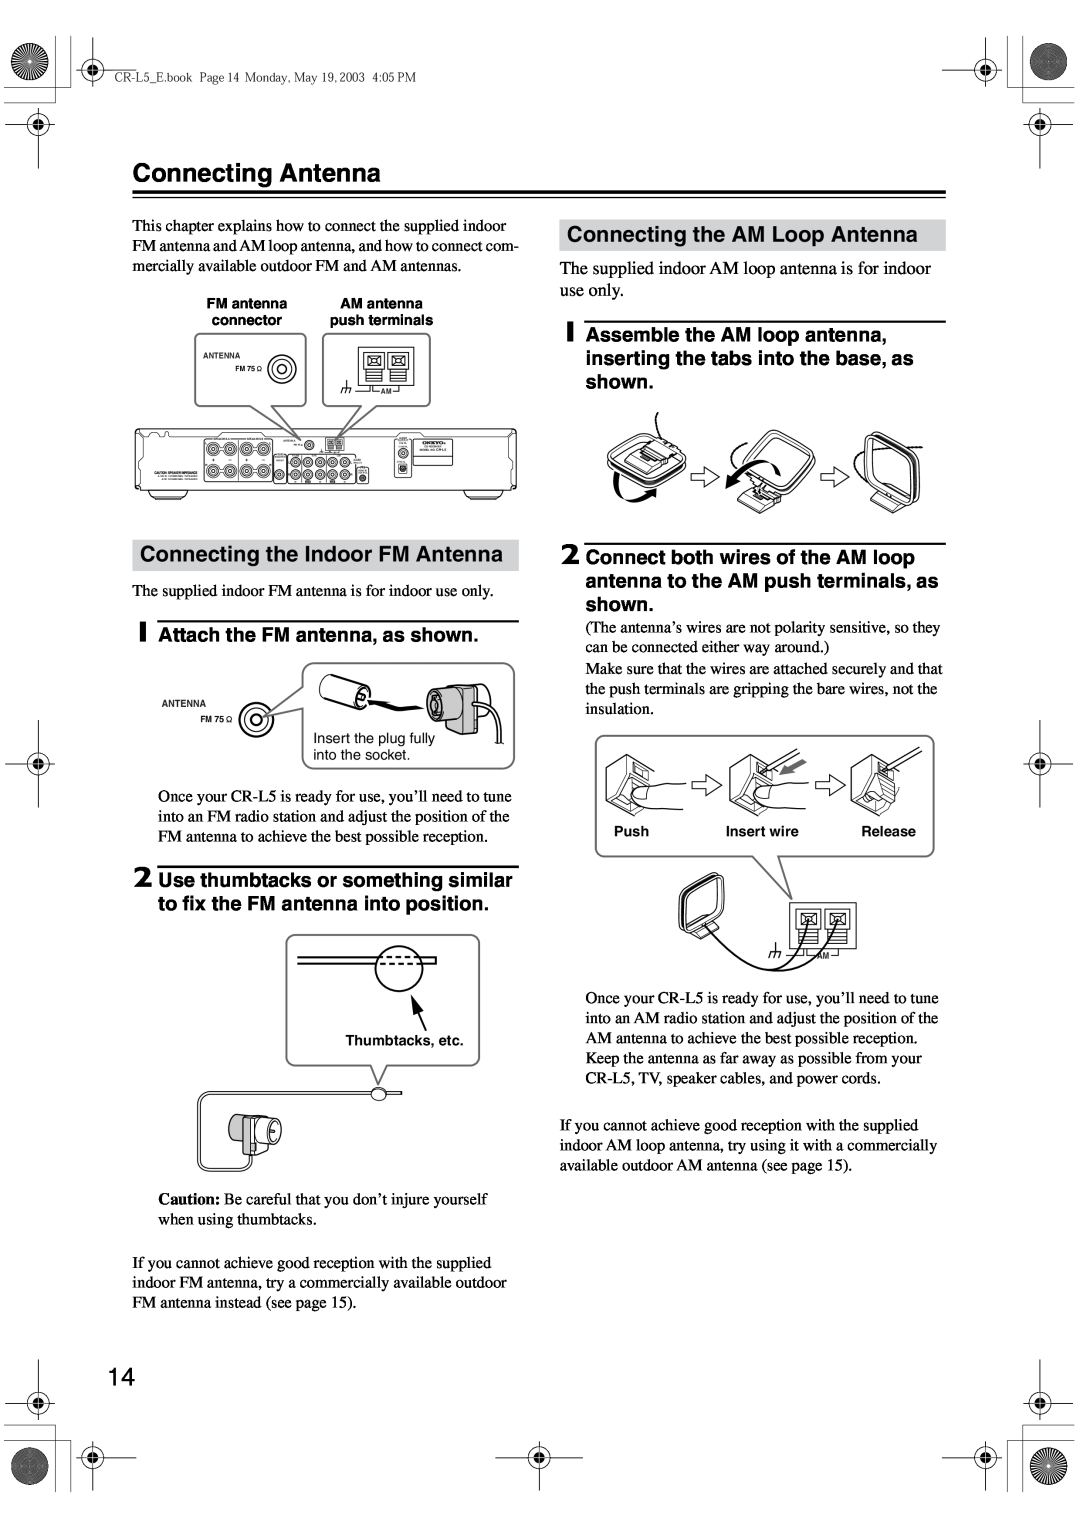 Onkyo CR-L5 instruction manual Connecting Antenna, Connecting the AM Loop Antenna, Connecting the Indoor FM Antenna 